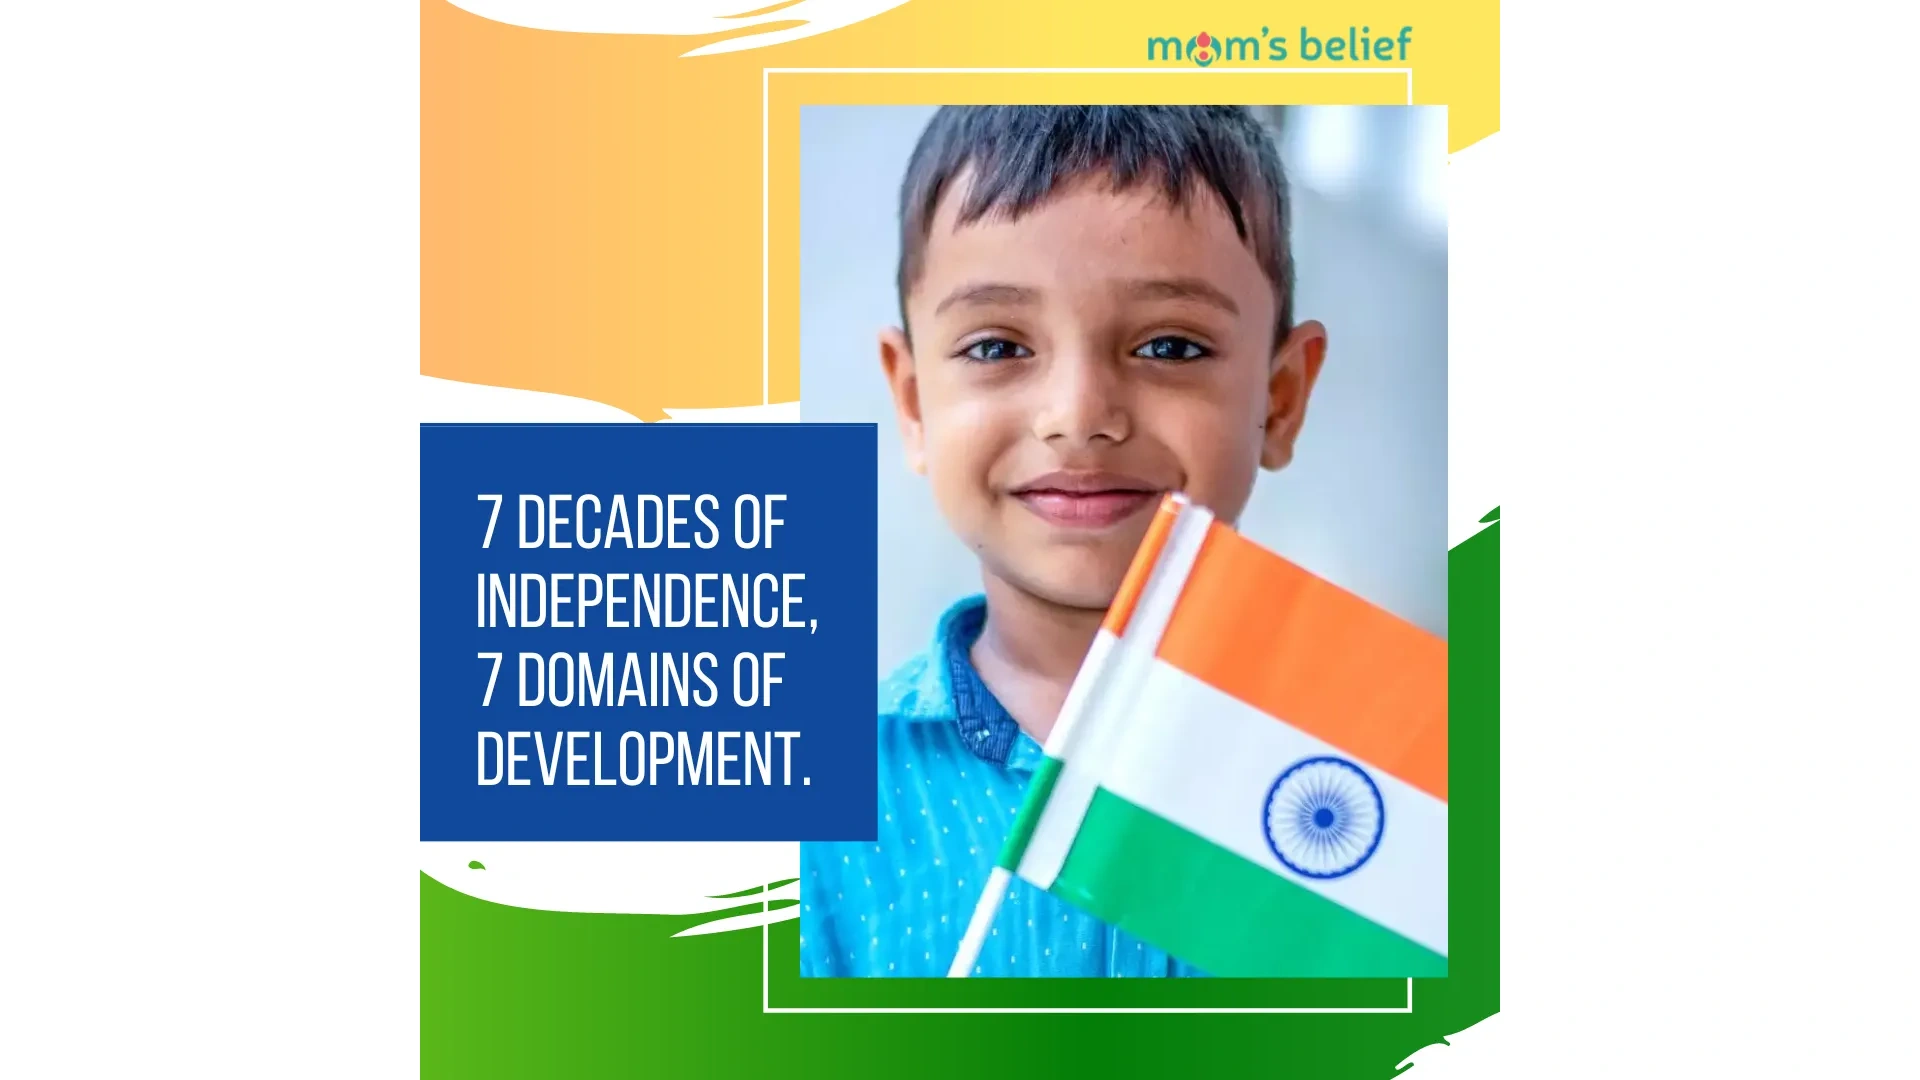 7 Decades of Independence & 7 Domains of Development.